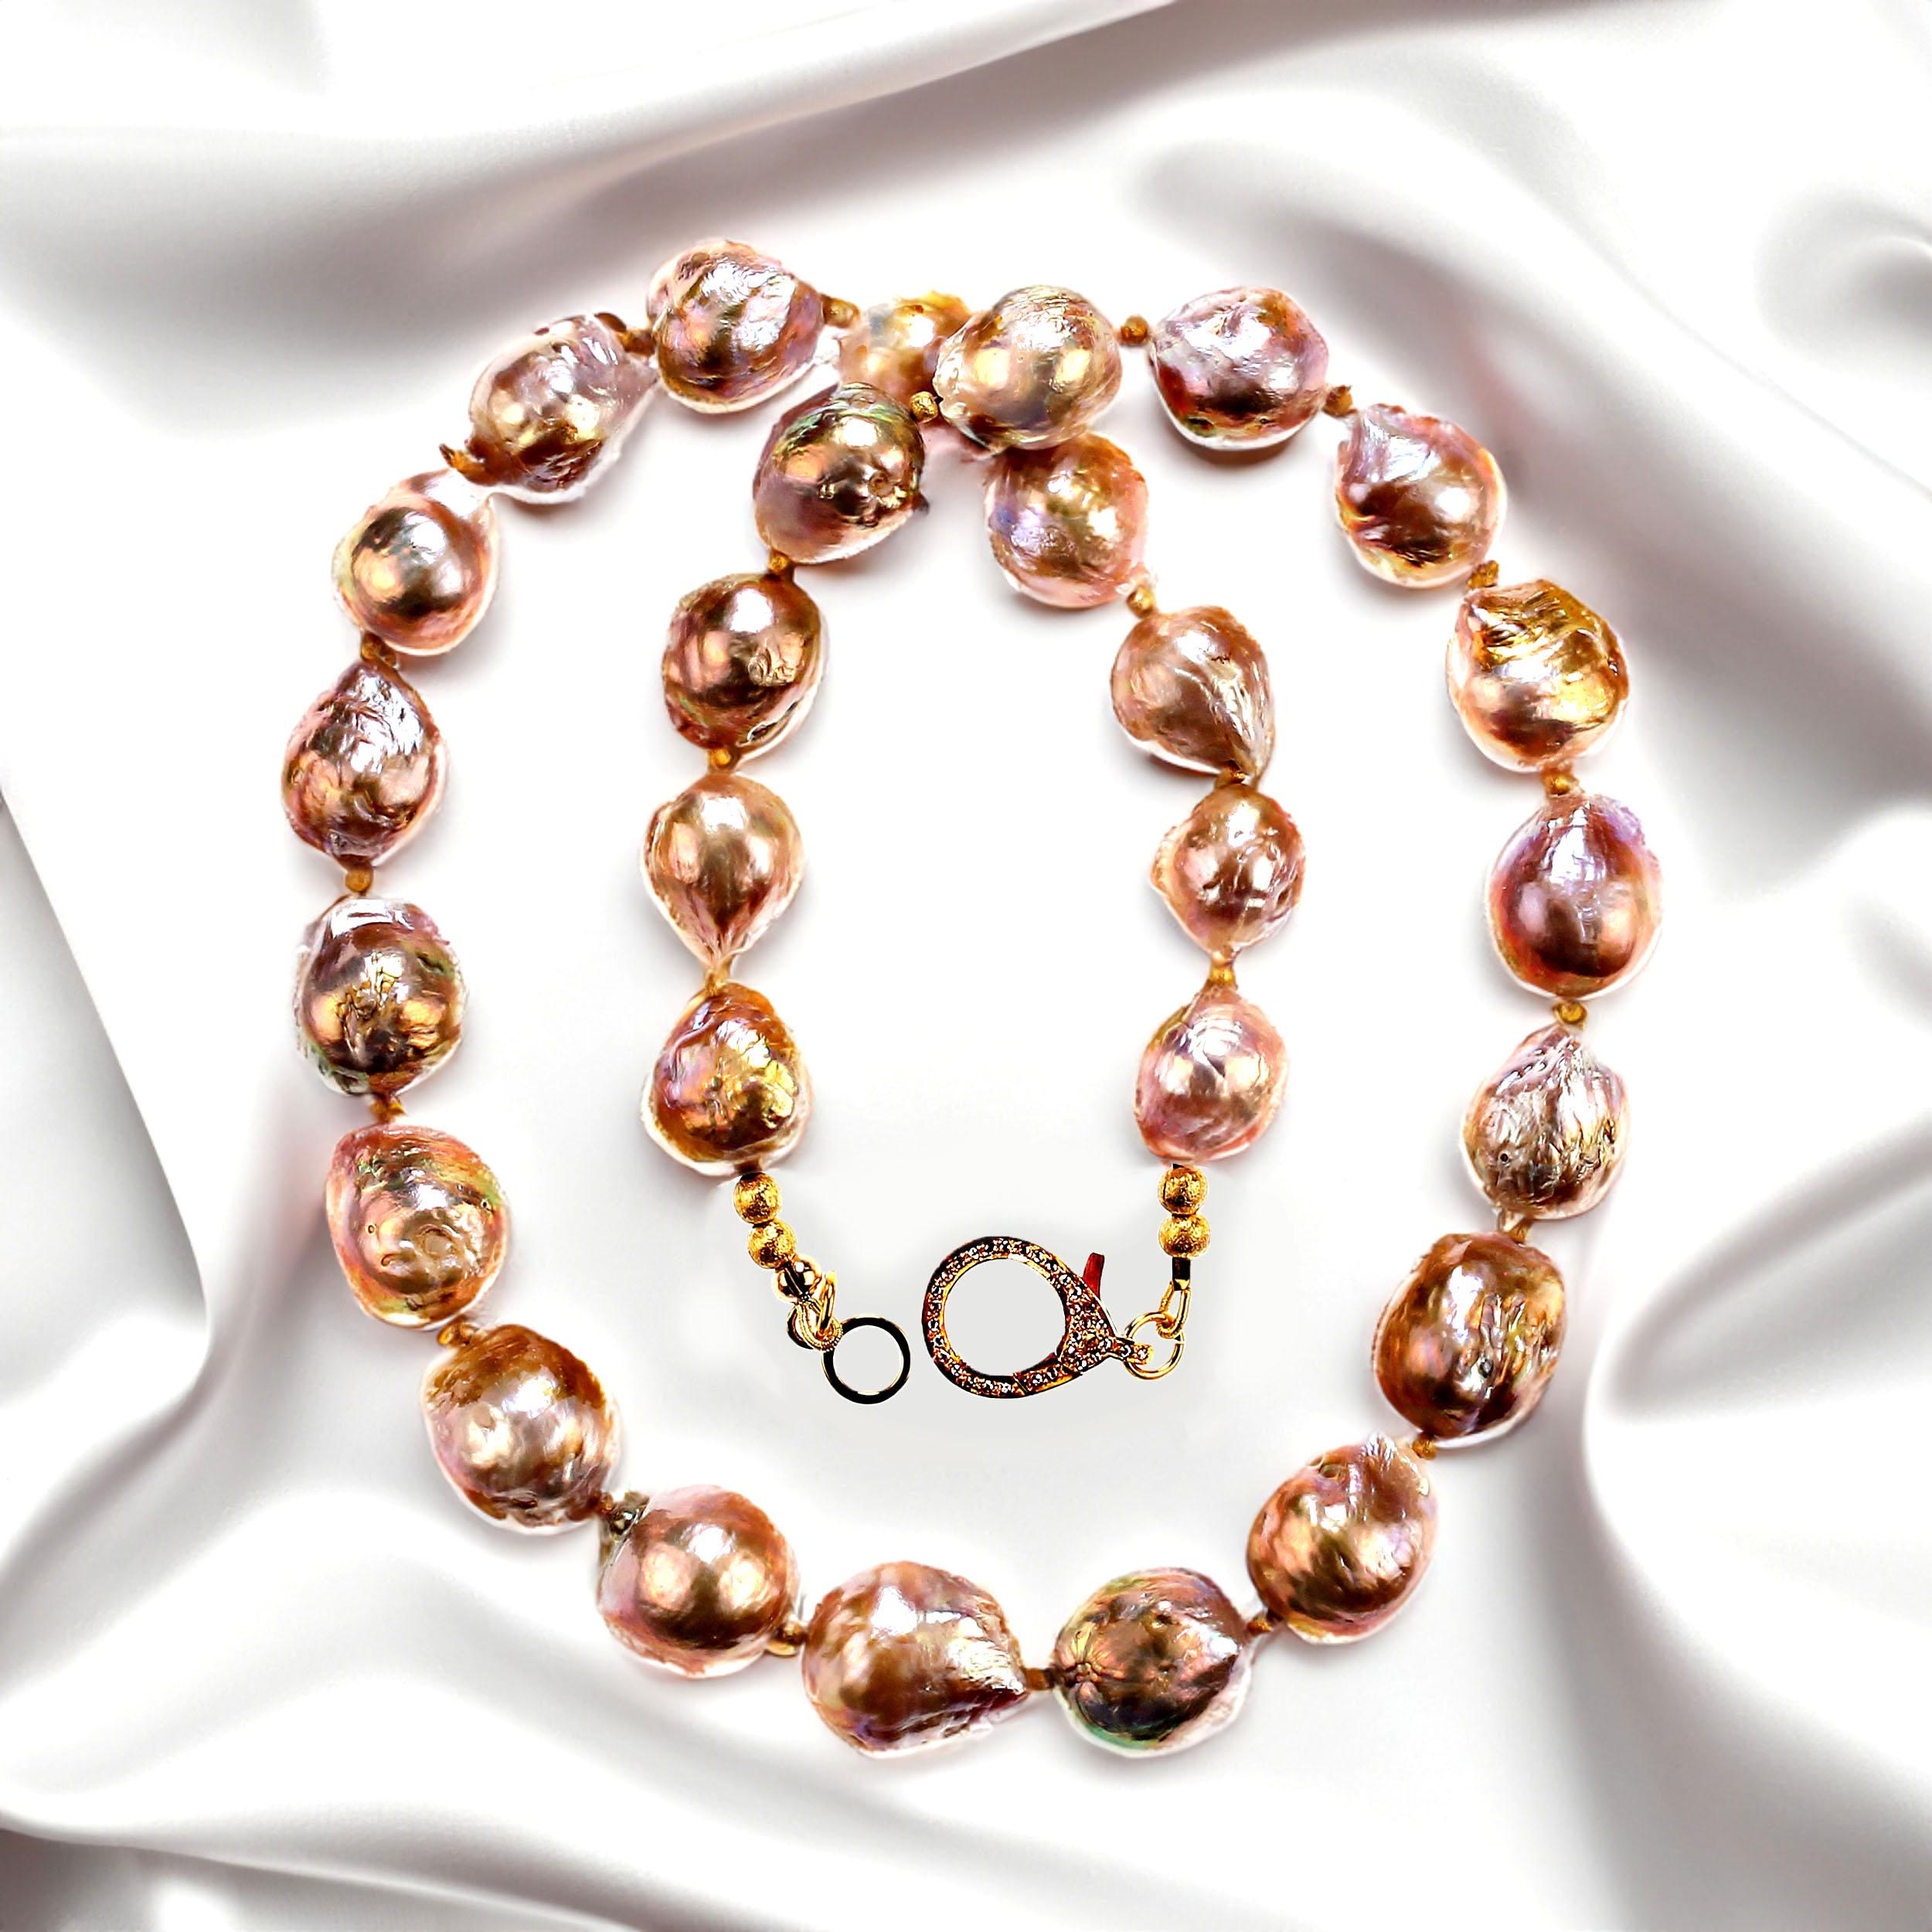 21 Inch elegant baroque pearl necklace with goldy accents.  These gorgeous 11-15 mm gold pearls feature pink and blue flashes.  The necklace is secured with a hammered 14k gold vermeil hook and eye clasp.  MN2357